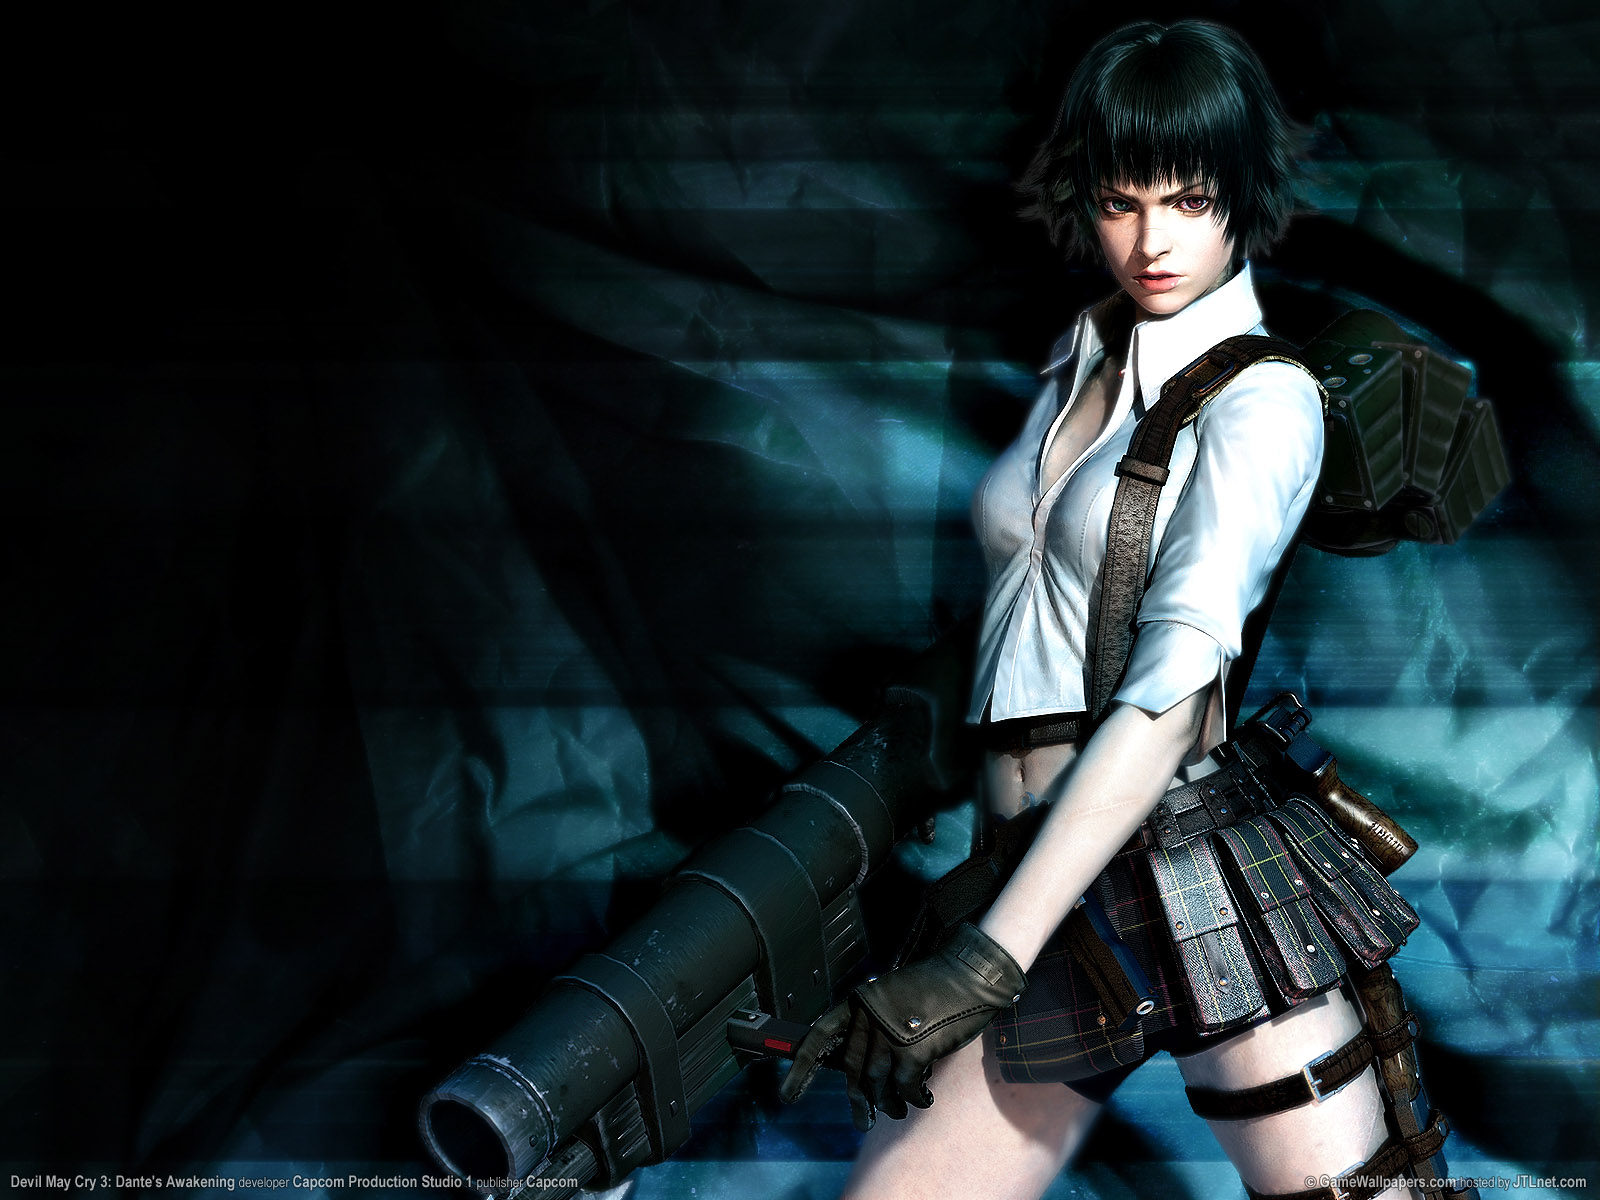 Cry HD Wallpapers | Devil May Cry Desktop Wallpapers | Devil May Cry ...